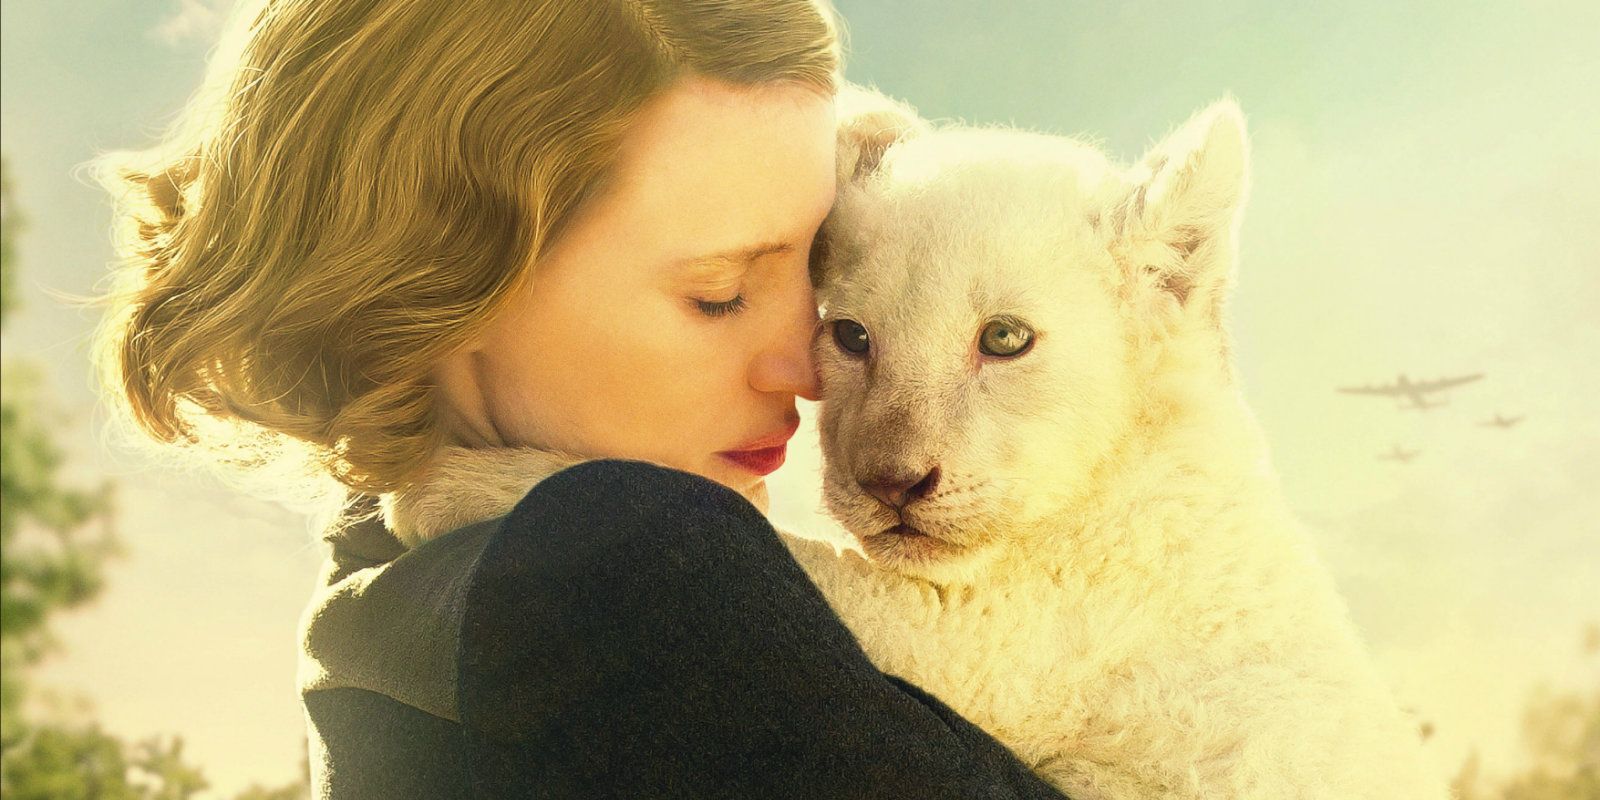 Pôster de The Zookeeper's Wife (cortado) - Jessica Chastain